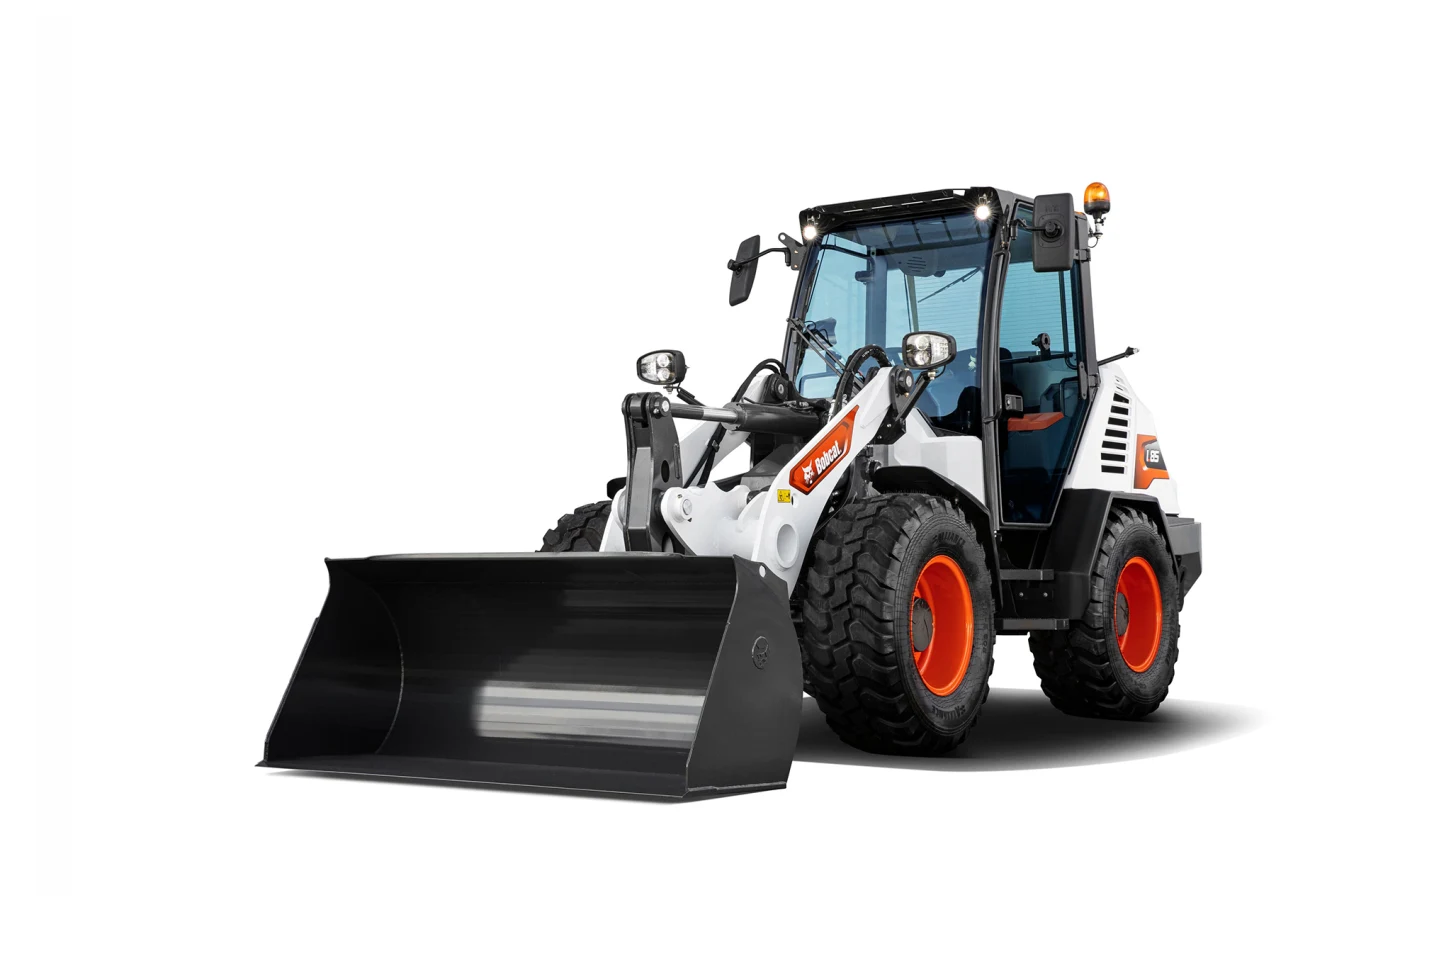 Browse Specs and more for the Bobcat L85 Compact Wheel Loader - Bobcat of North Texas